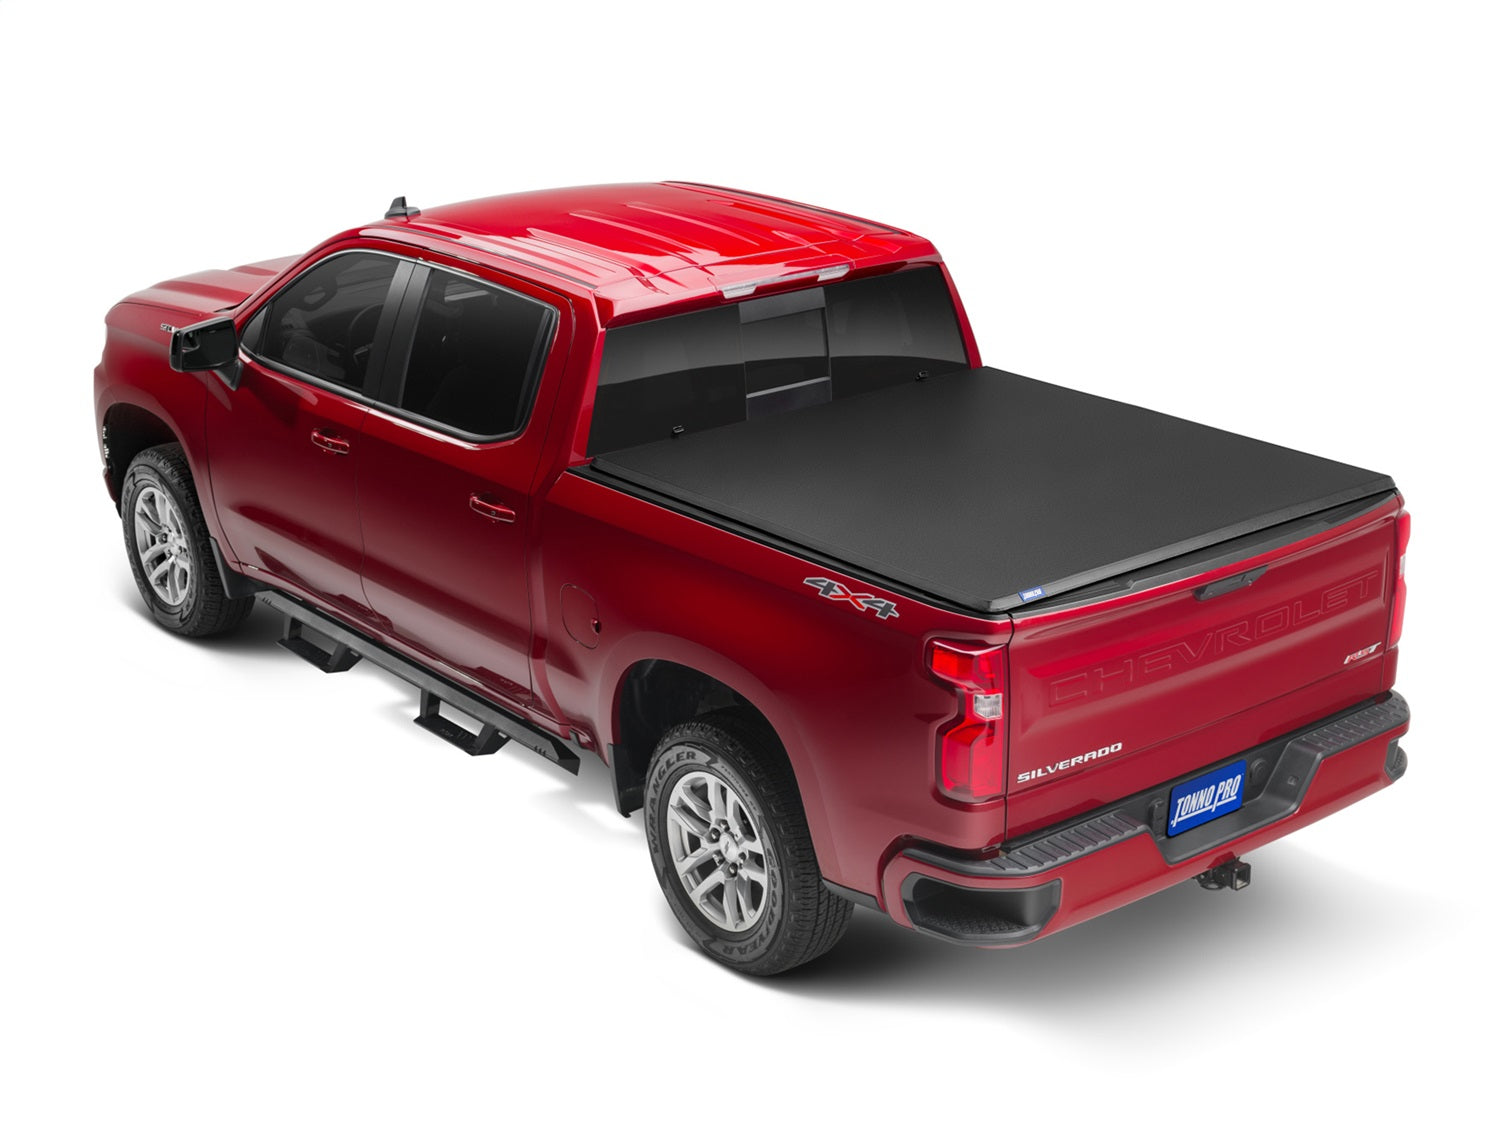 Tonno Pro HF-452 Tonno Pro Hard Fold Bed Cover Fits 04-21 Equator Frontier